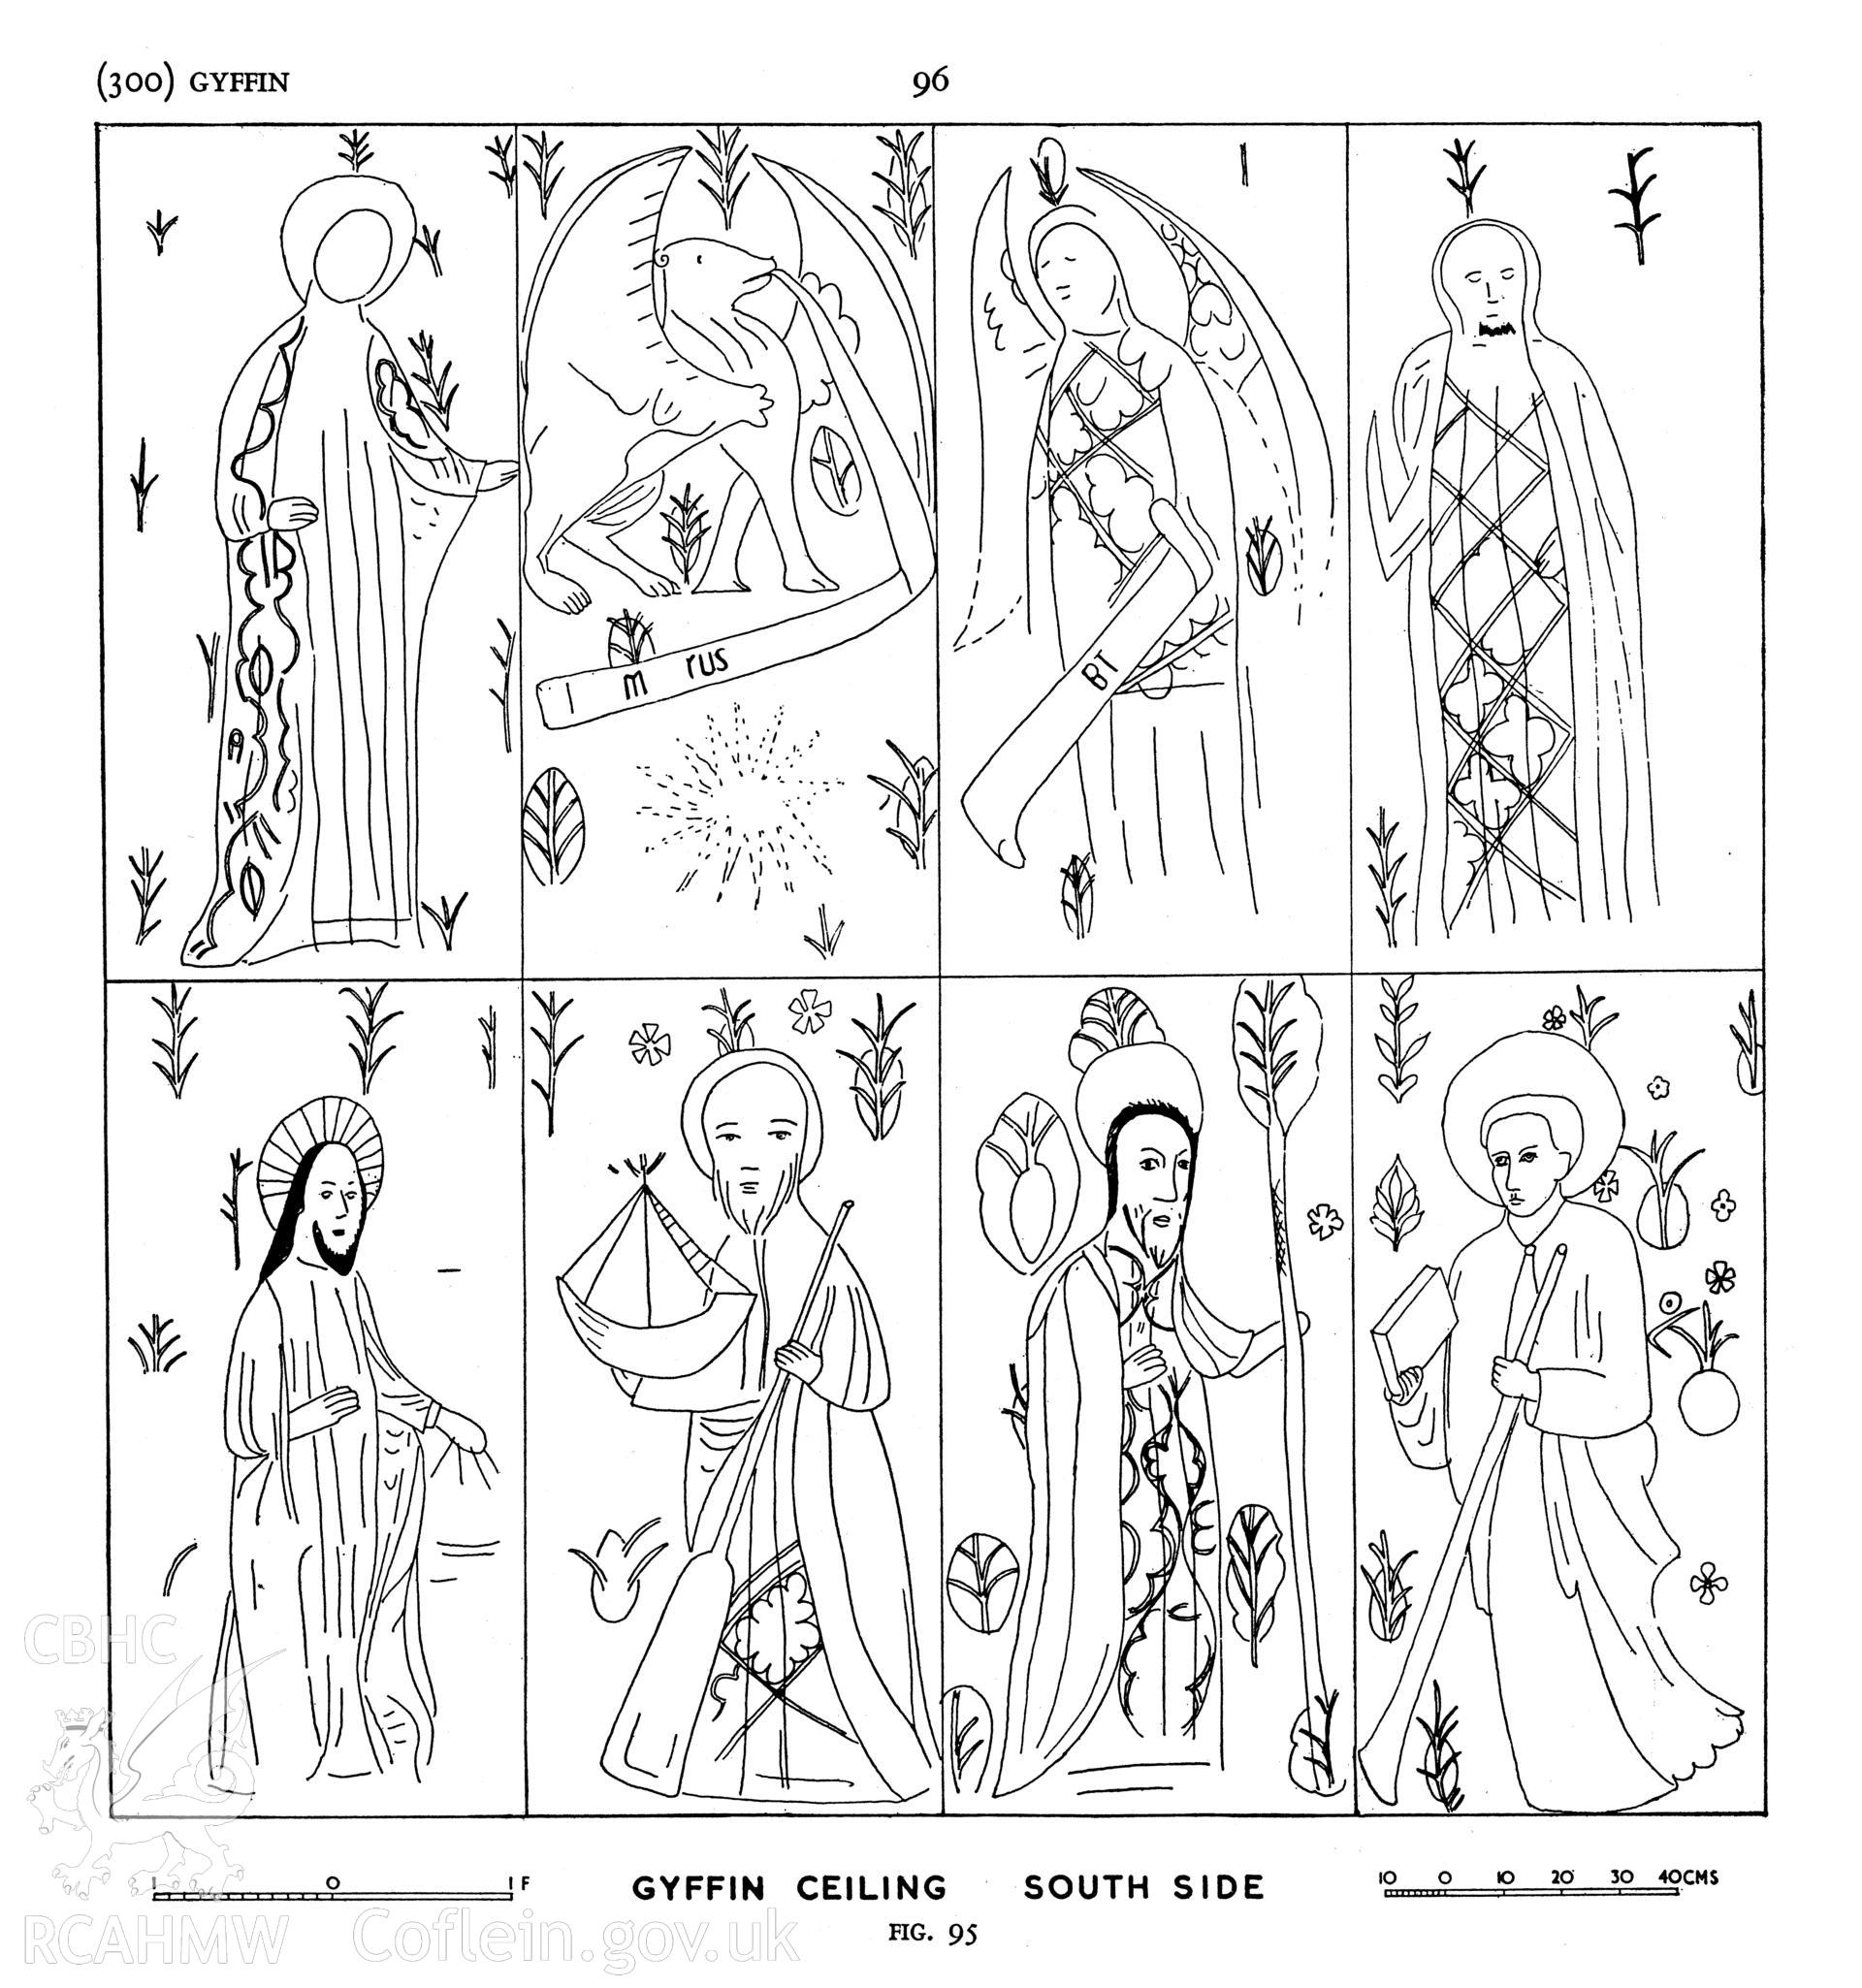 Record drawing of the painted figures on the canopy at Y Gyffin. Scan by Y Lolfa of RCAHMW, Caernarvonshire Inventory, Vol. I, figs 94 & 95. Original drawing not scanned. As published in 'Temlau Peintiedig: Murluniau a Chroglenni yn Eglwysi Cymru, 1200–1800 / Painted Temples: Wallpaintings and Rood-screens in Welsh Churches, 1200–1800.' Figure 3.31b, page 115.